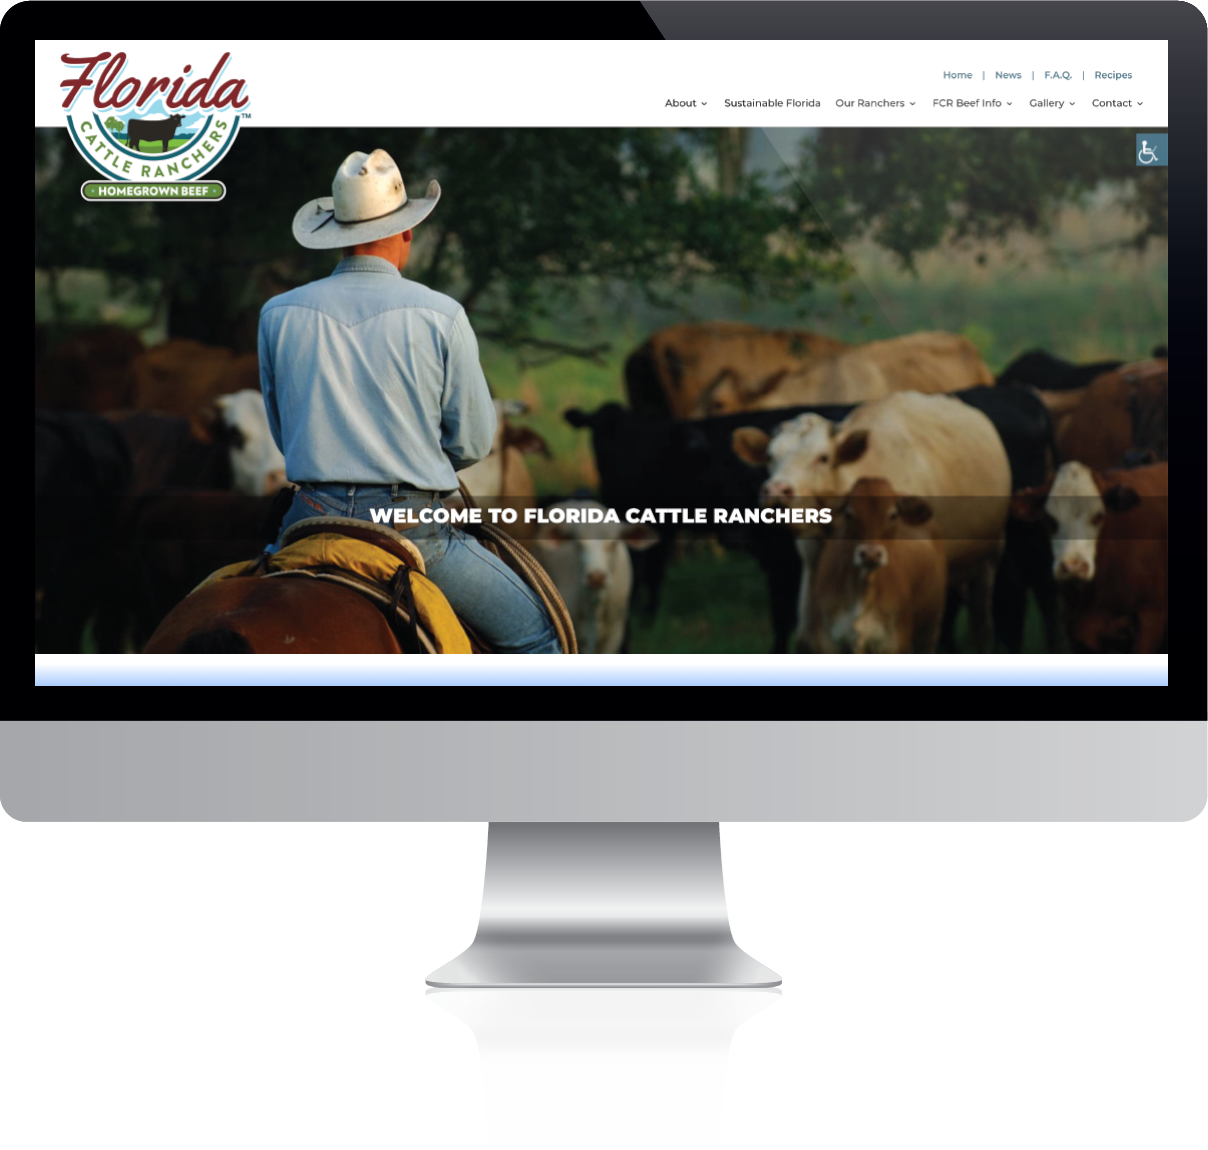 Florida Cattle Ranchers